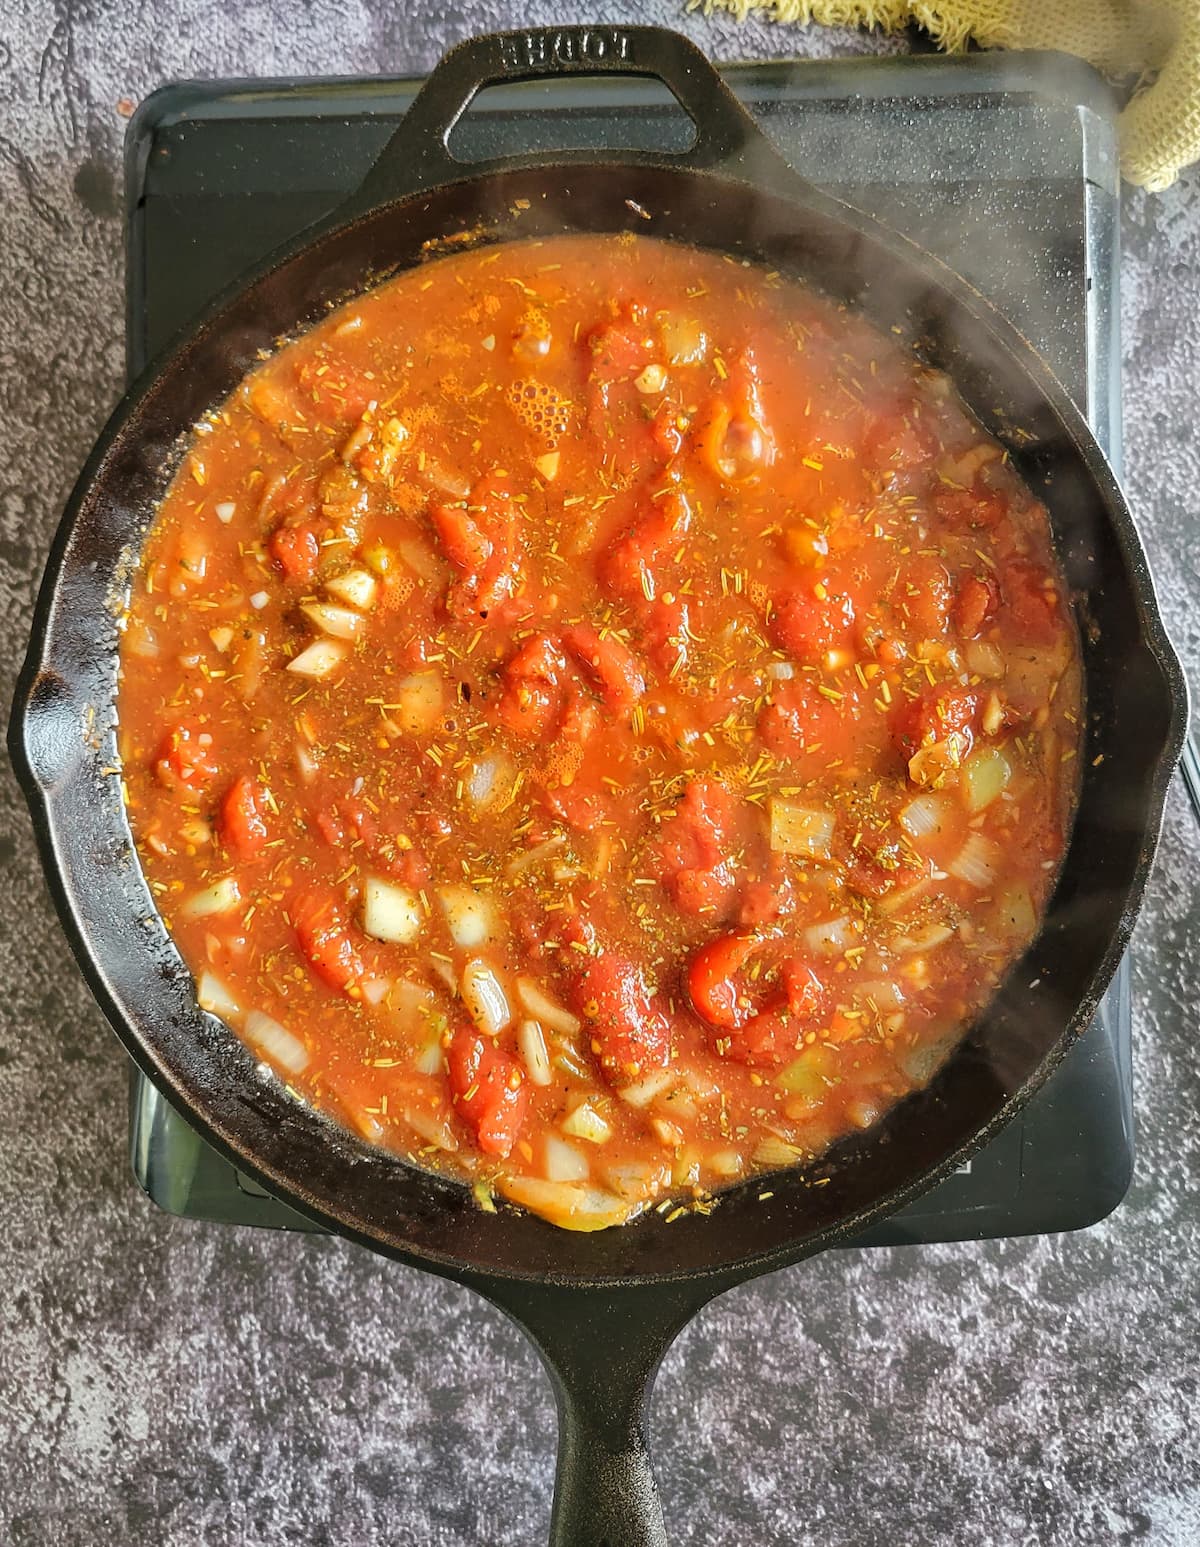 chunky tomato sauce with diced onions and seasonings steaming away in a cast iron skillet